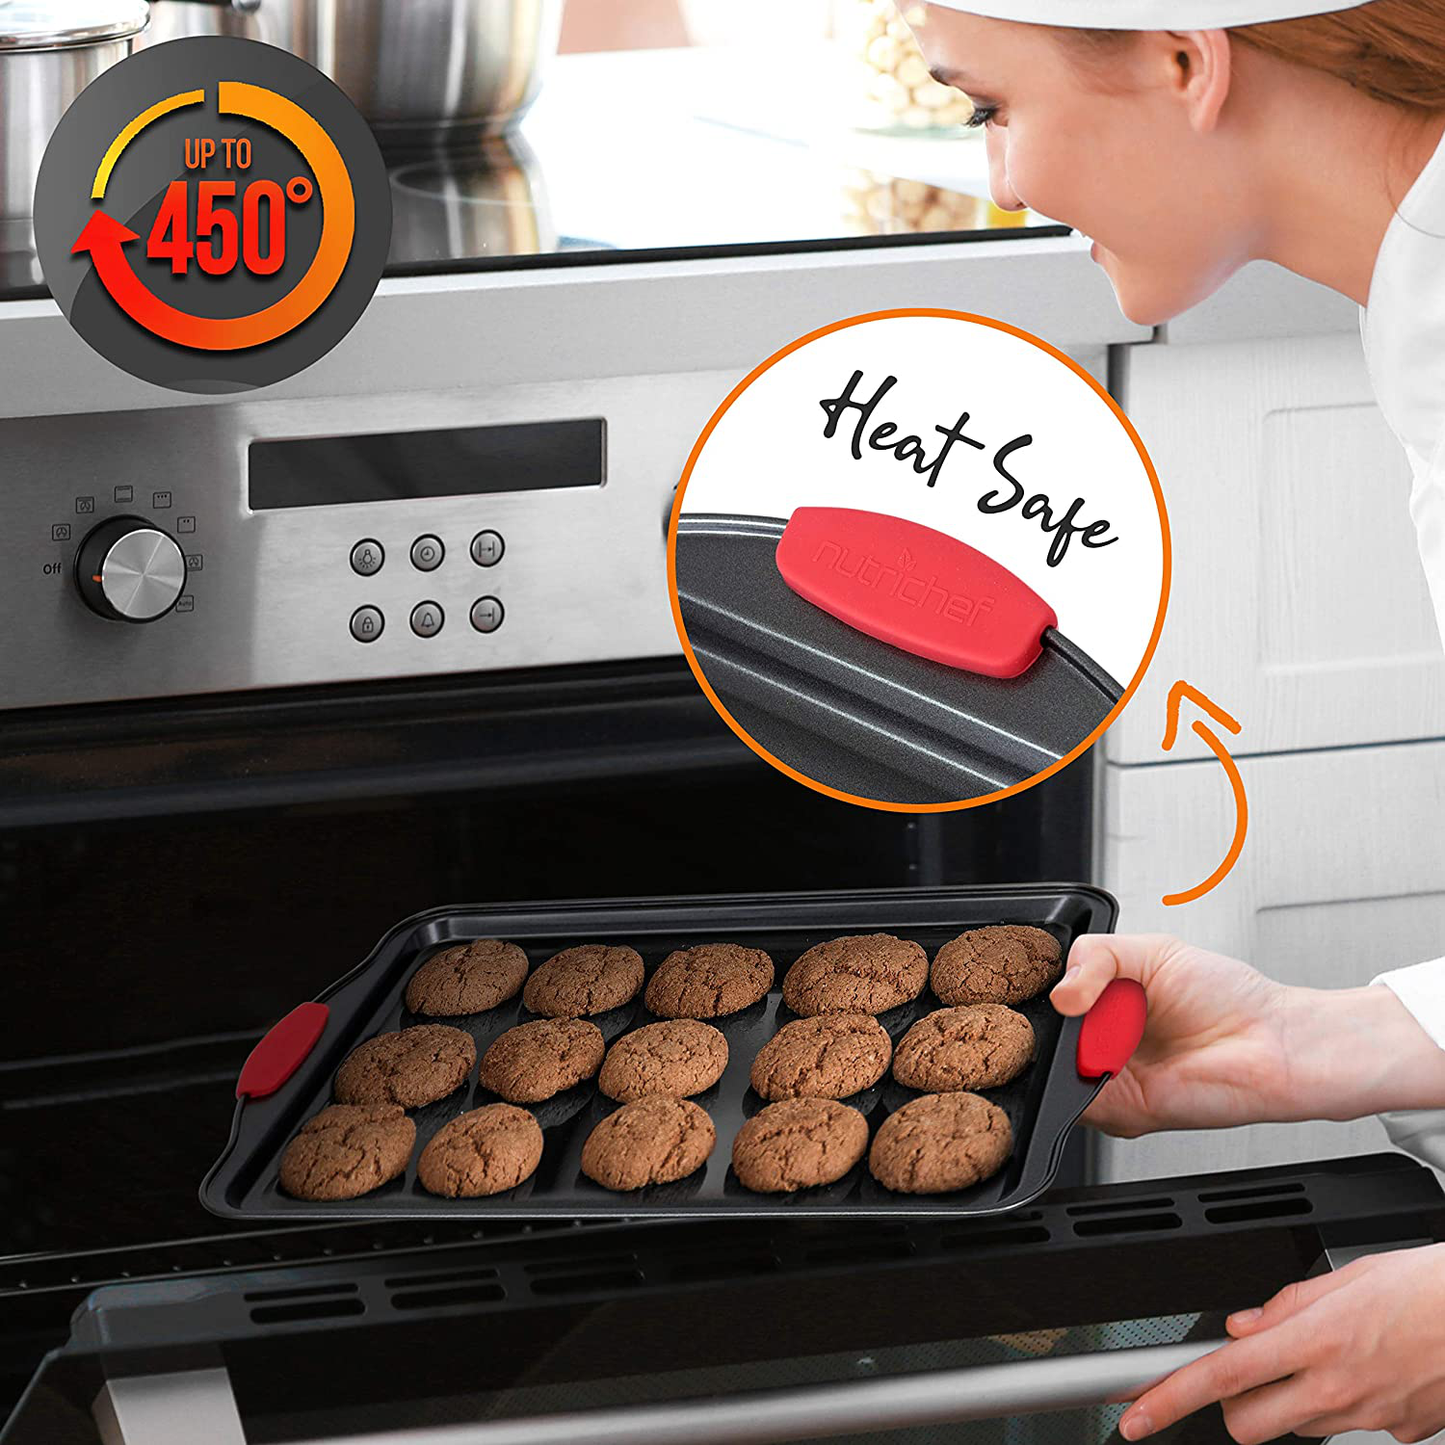 Nutrichef 8-Piece Carbon Steel Nonstick Bakeware Baking Tray Set w/Heat Red Silicone Handles, Oven Safe Up to 450°F, Black